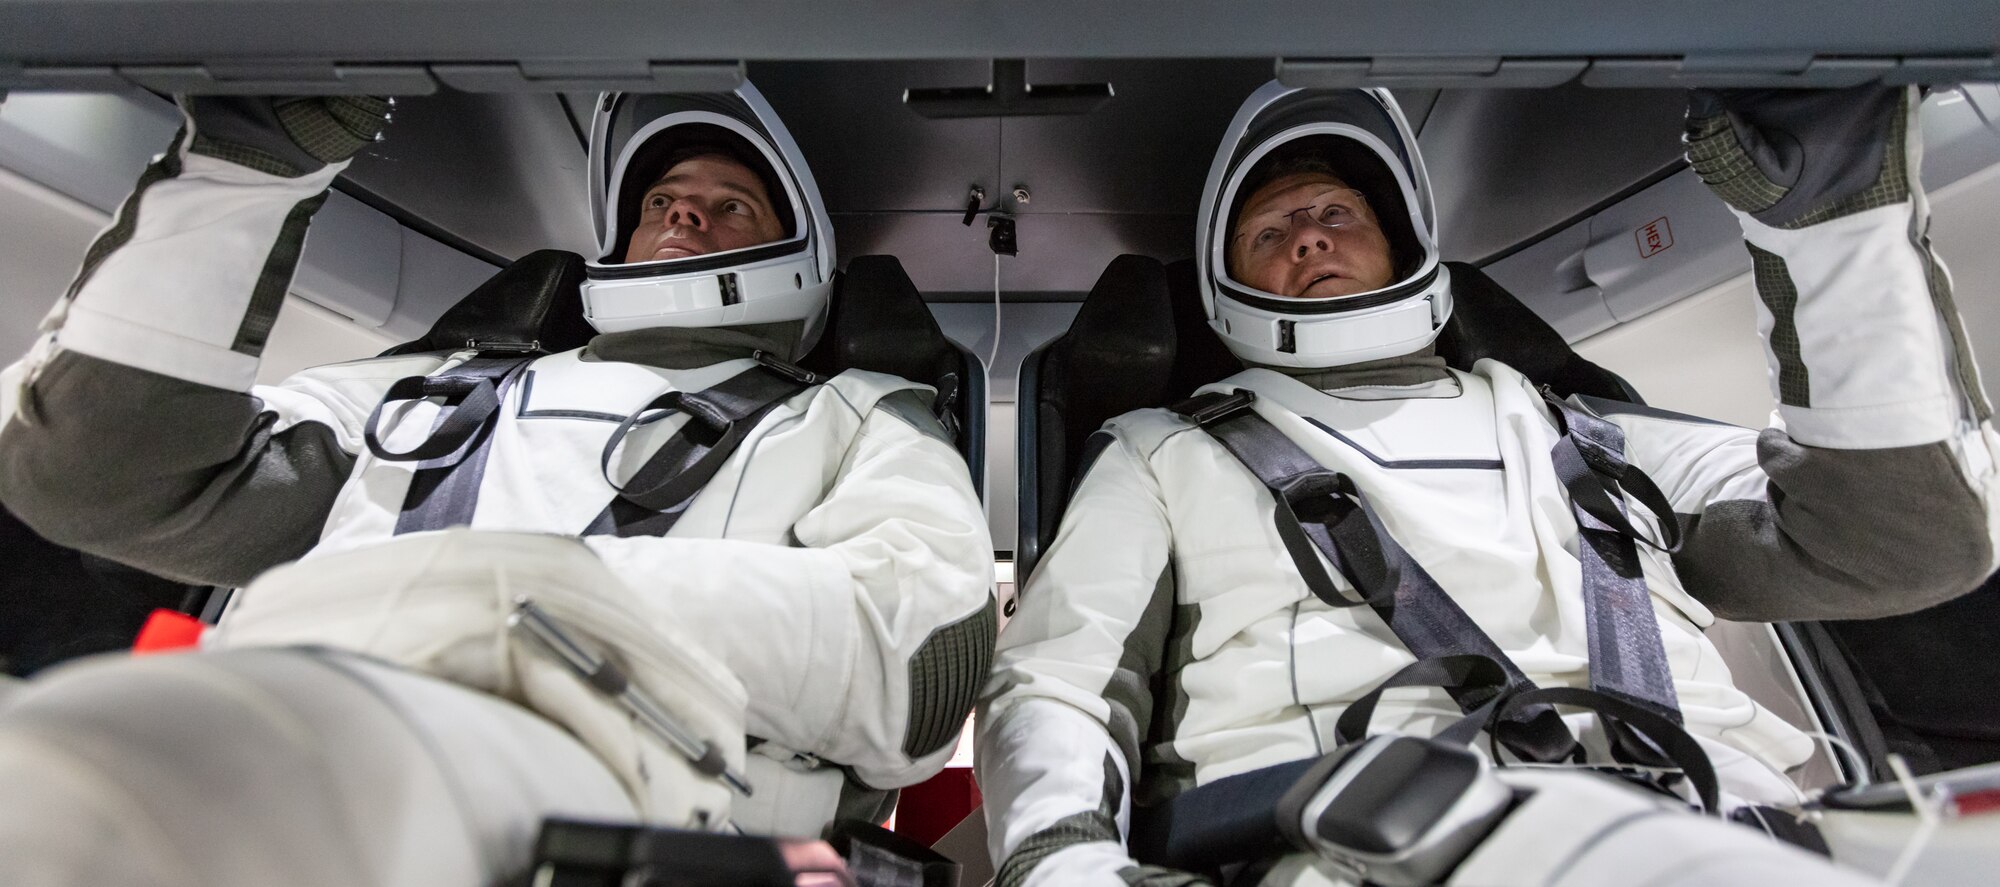 NASA astronauts Doug Hurley and Bob Behnken familiarize themselves with SpaceX’s Crew Dragon, the spacecraft that will transport them to the International Space Station as part of NASA’s Commercial Crew Program. Their upcoming flight test is known as Demo-2, short for Demonstration Mission 2. The Crew Dragon will launch on SpaceX’s Falcon 9 rocket from Launch Complex 39A at NASA’s Kennedy Space Center in Florida. In March 2019, SpaceX completed an uncrewed flight test of Crew Dragon known as Demo-1, which was designed to validate end-to-end systems and capabilities, bringing NASA closer to certification of SpaceX systems to fly a crew.